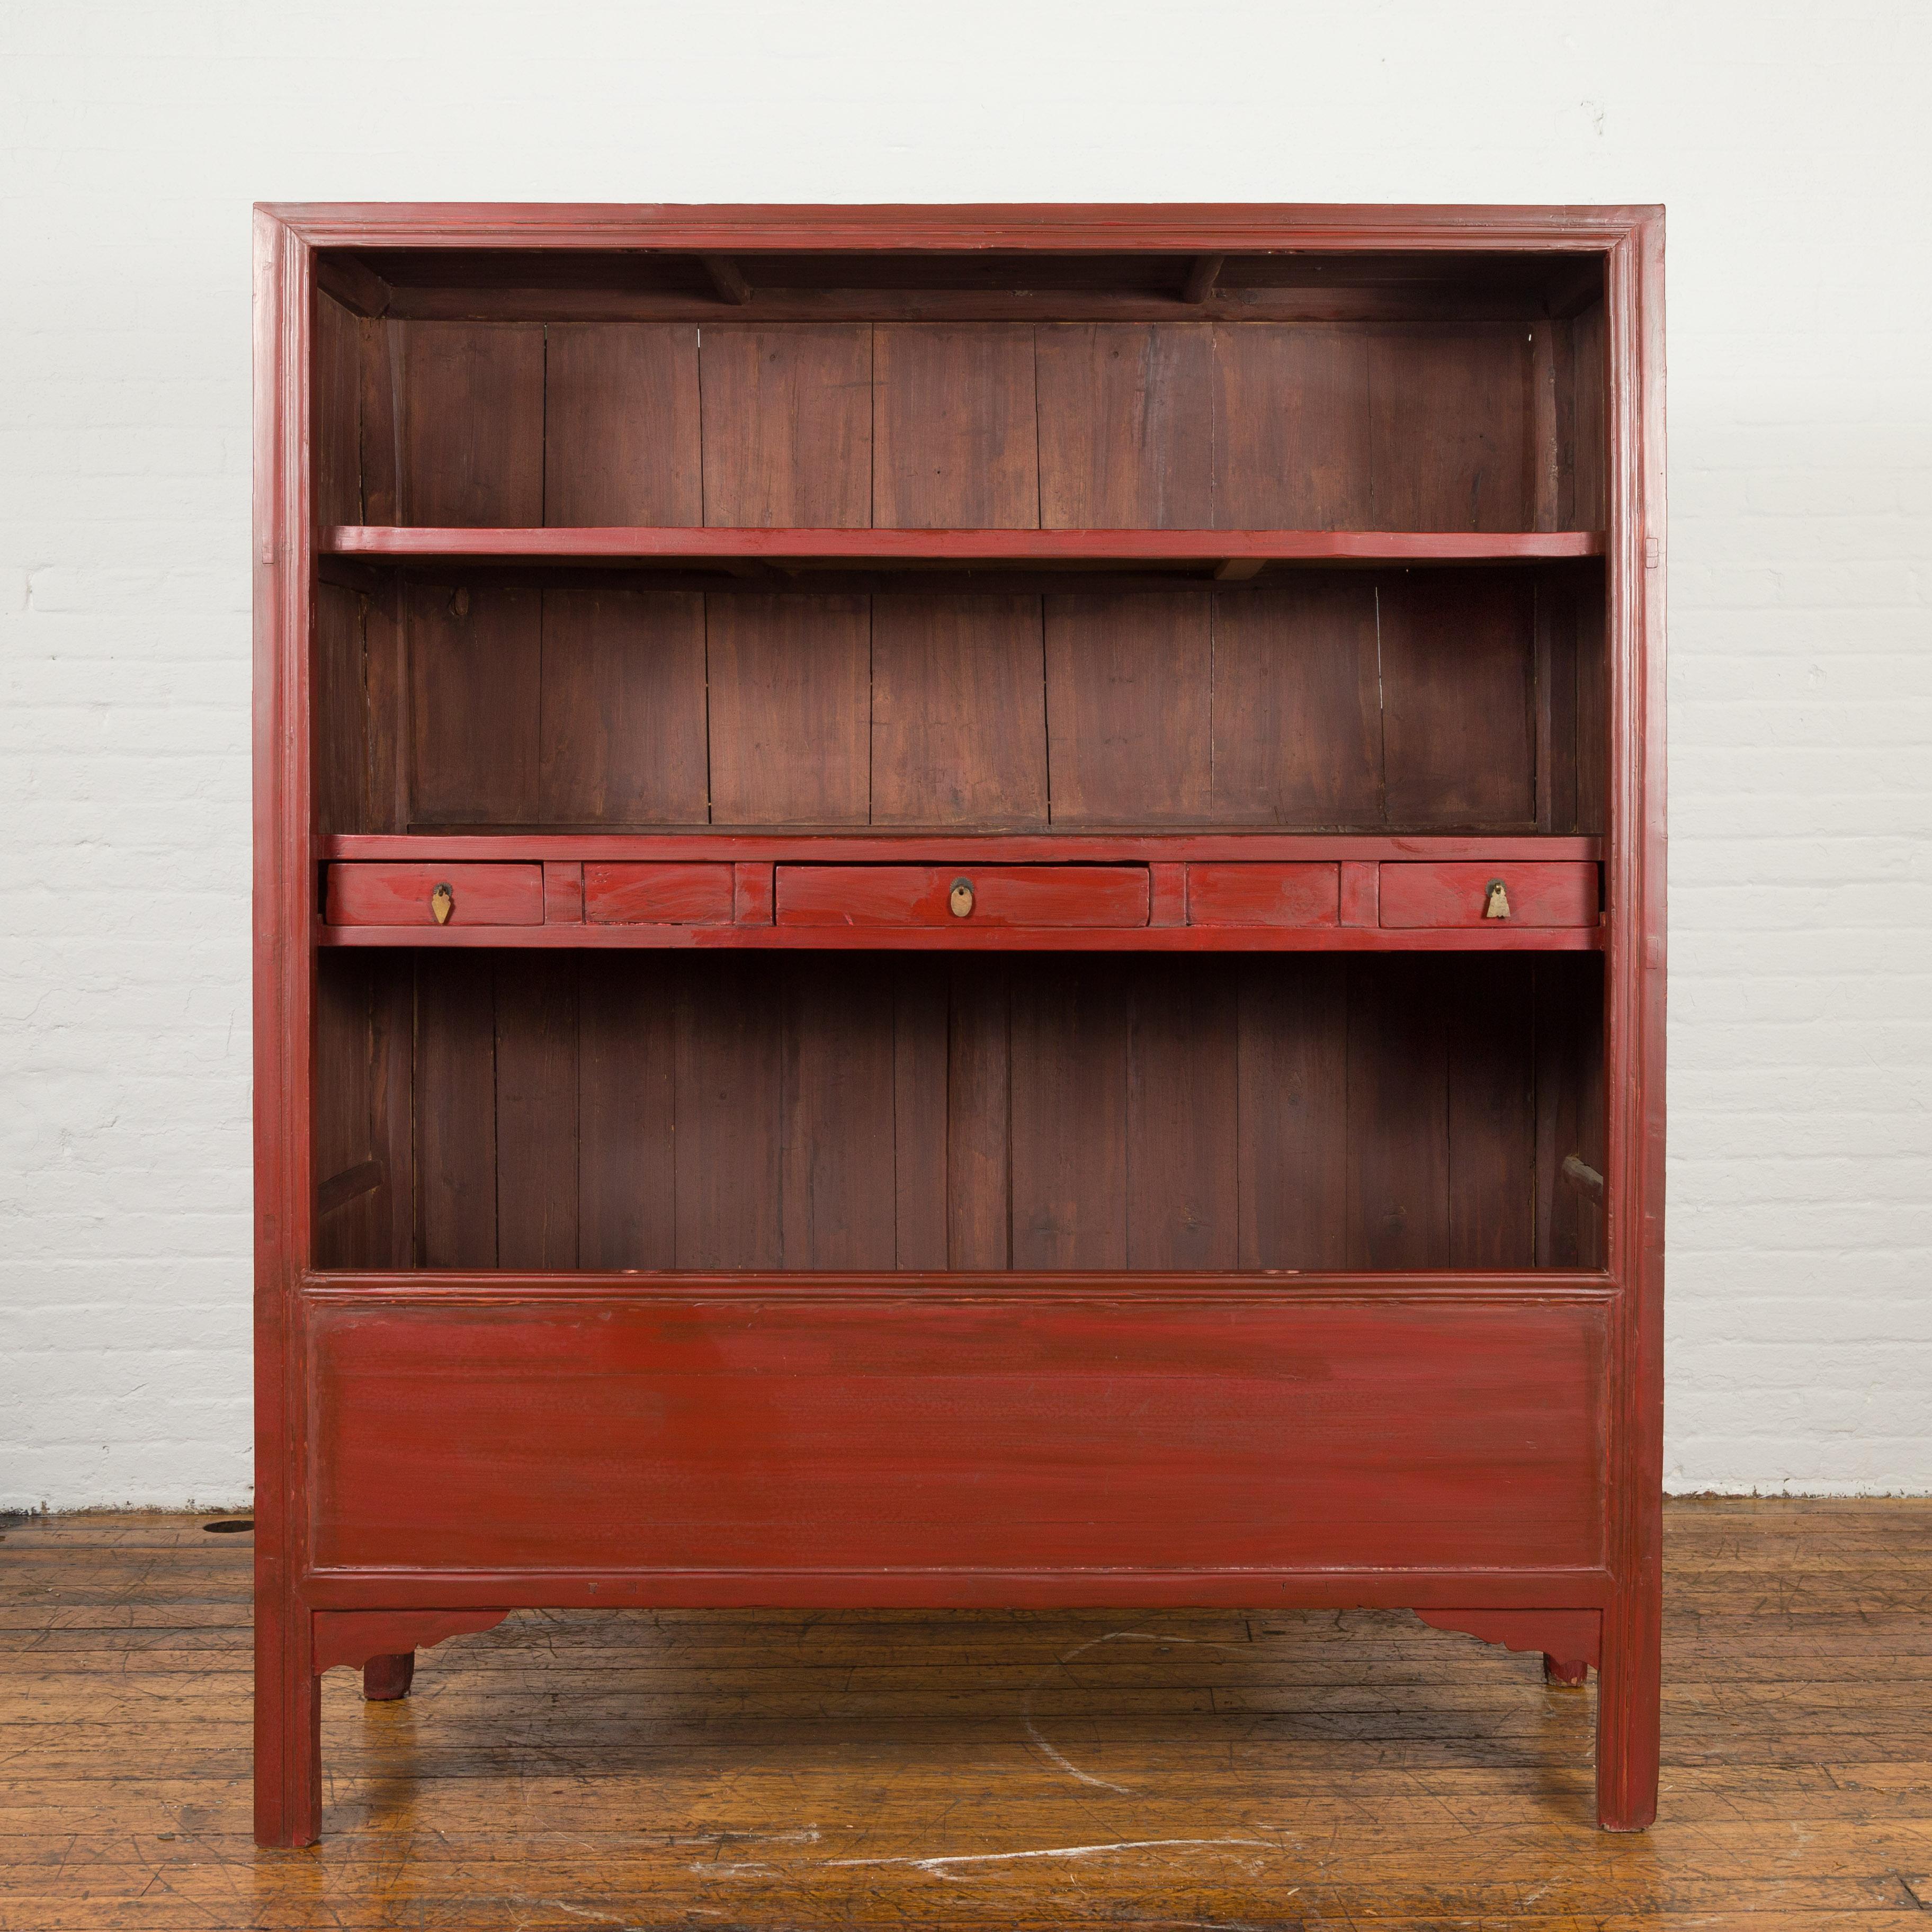 A Chinese antique cabinet from the early 20th century, converted into an open display cabinet with three drawers. Created in China during the early years of the 20th century, this red lacquered converted cabinet showcases a simple façade made of